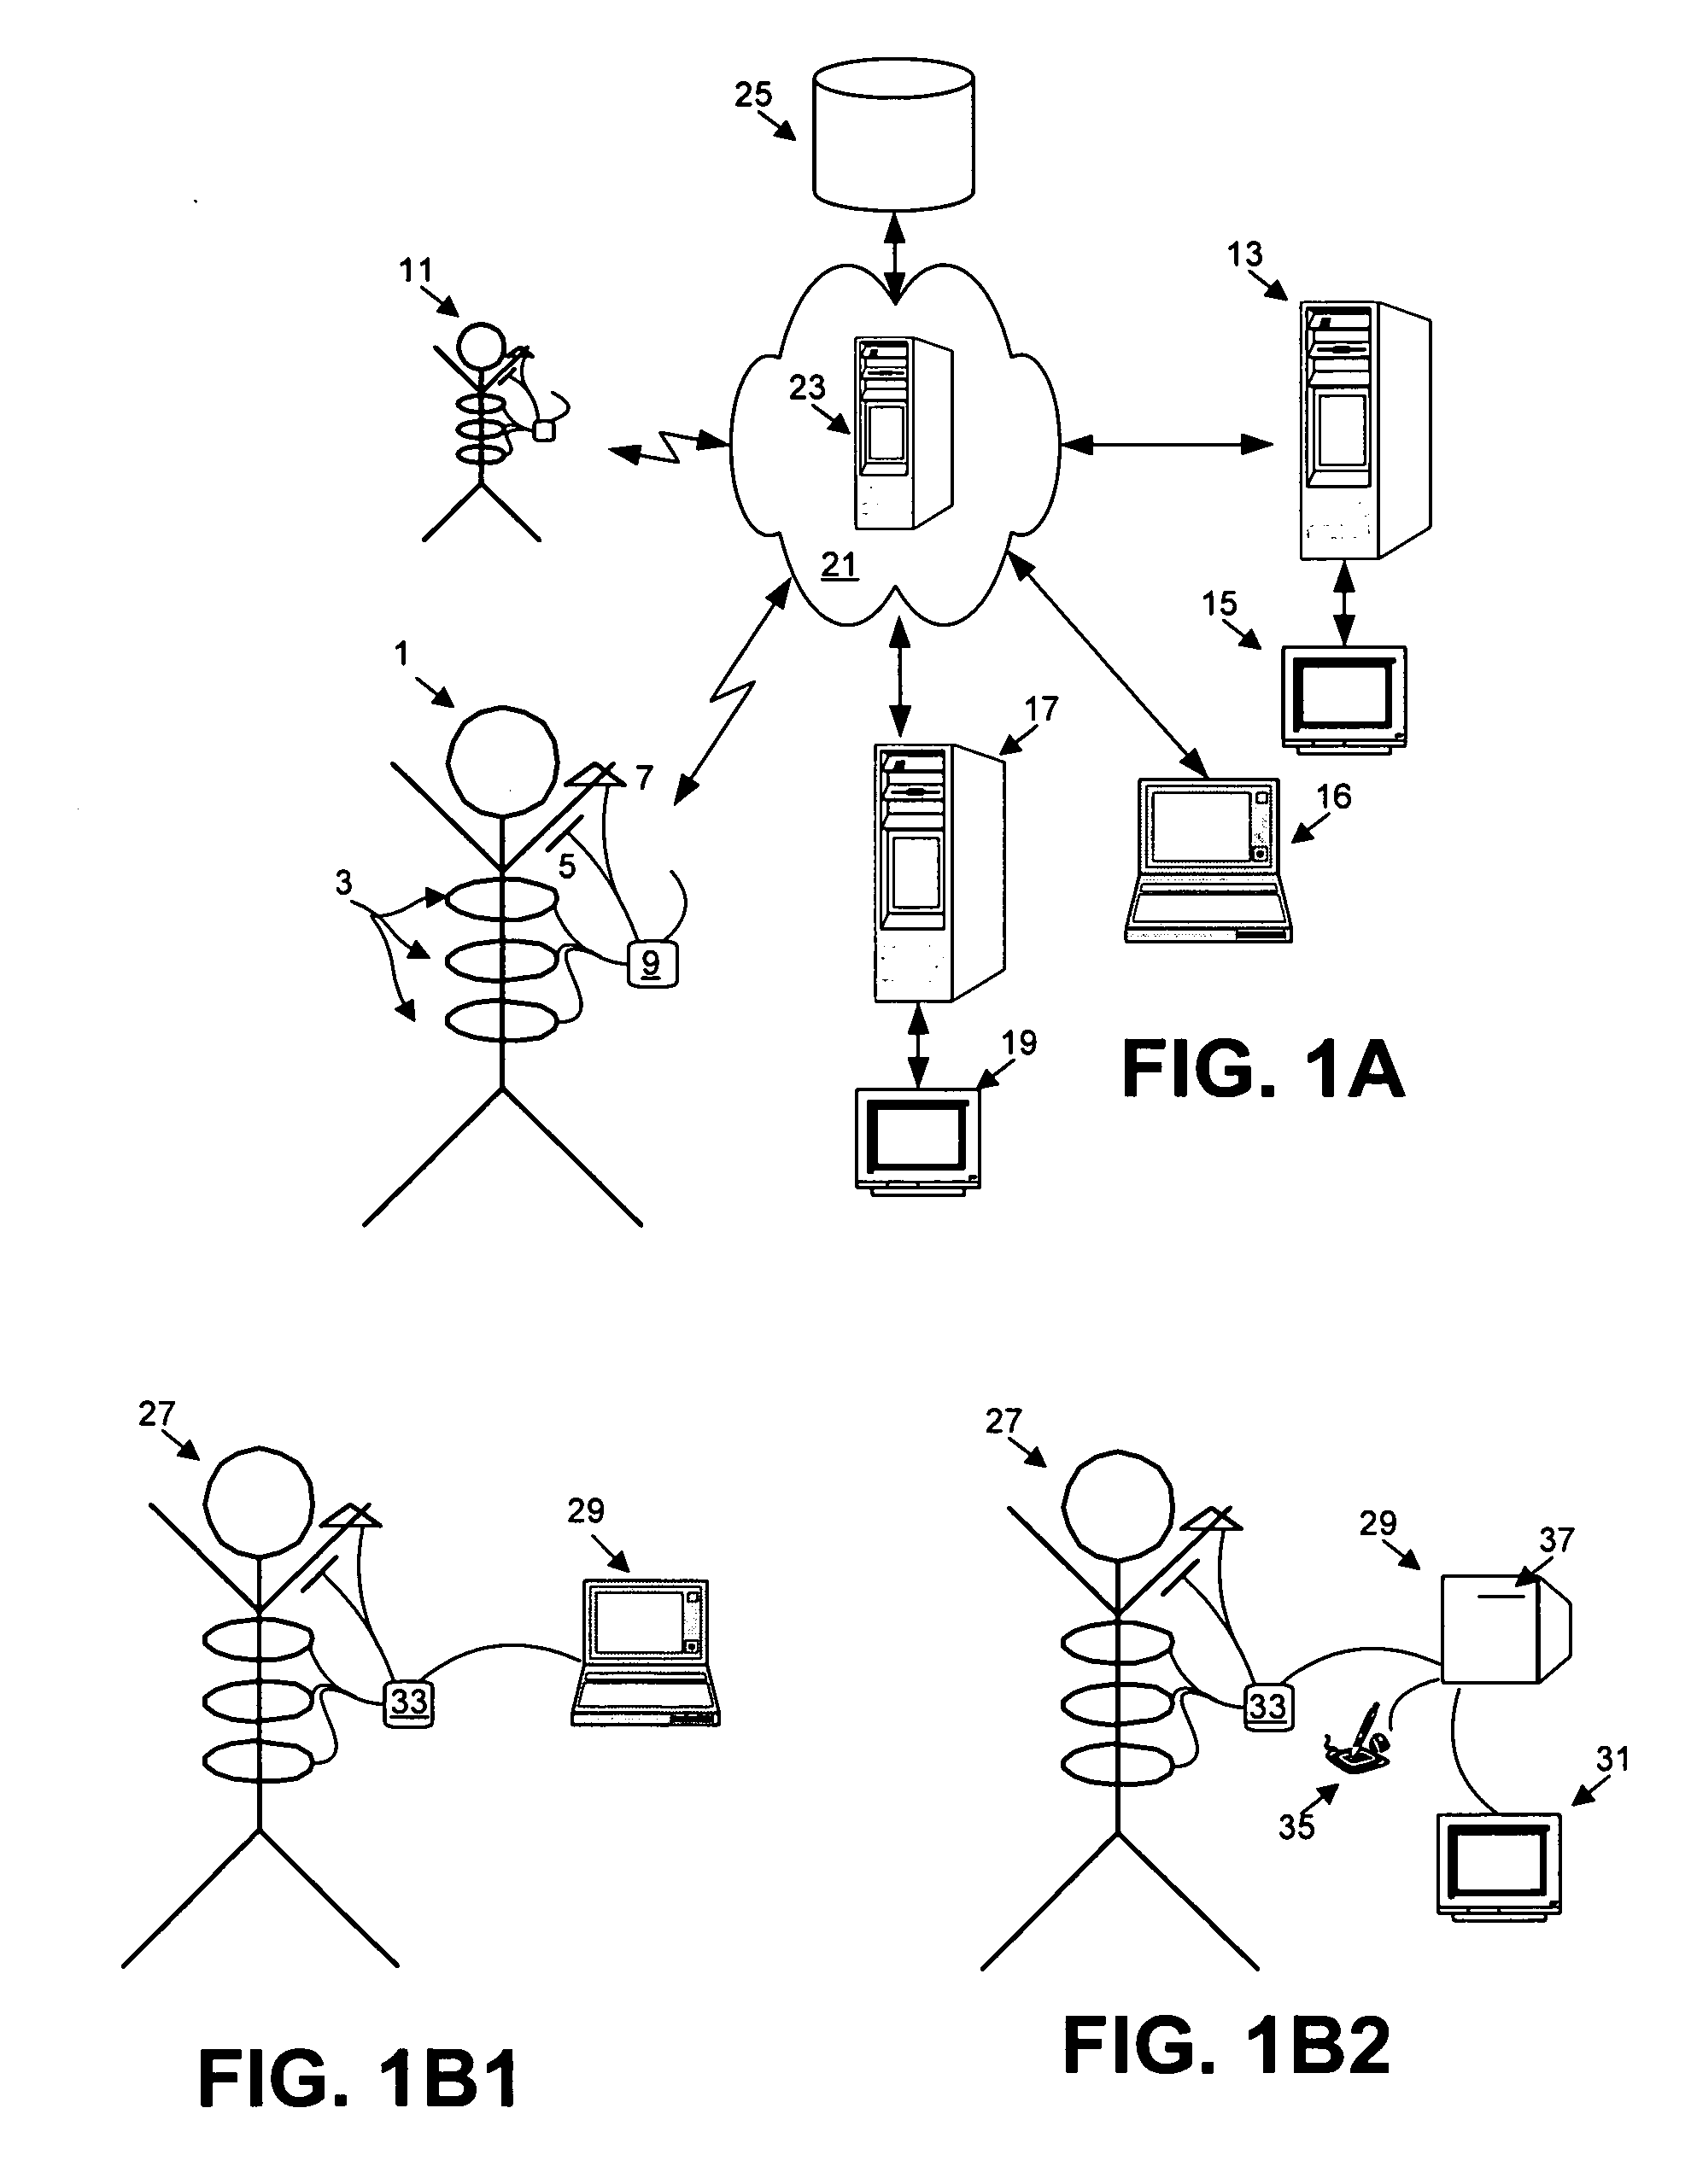 Computer interfaces including physiologically guided avatars